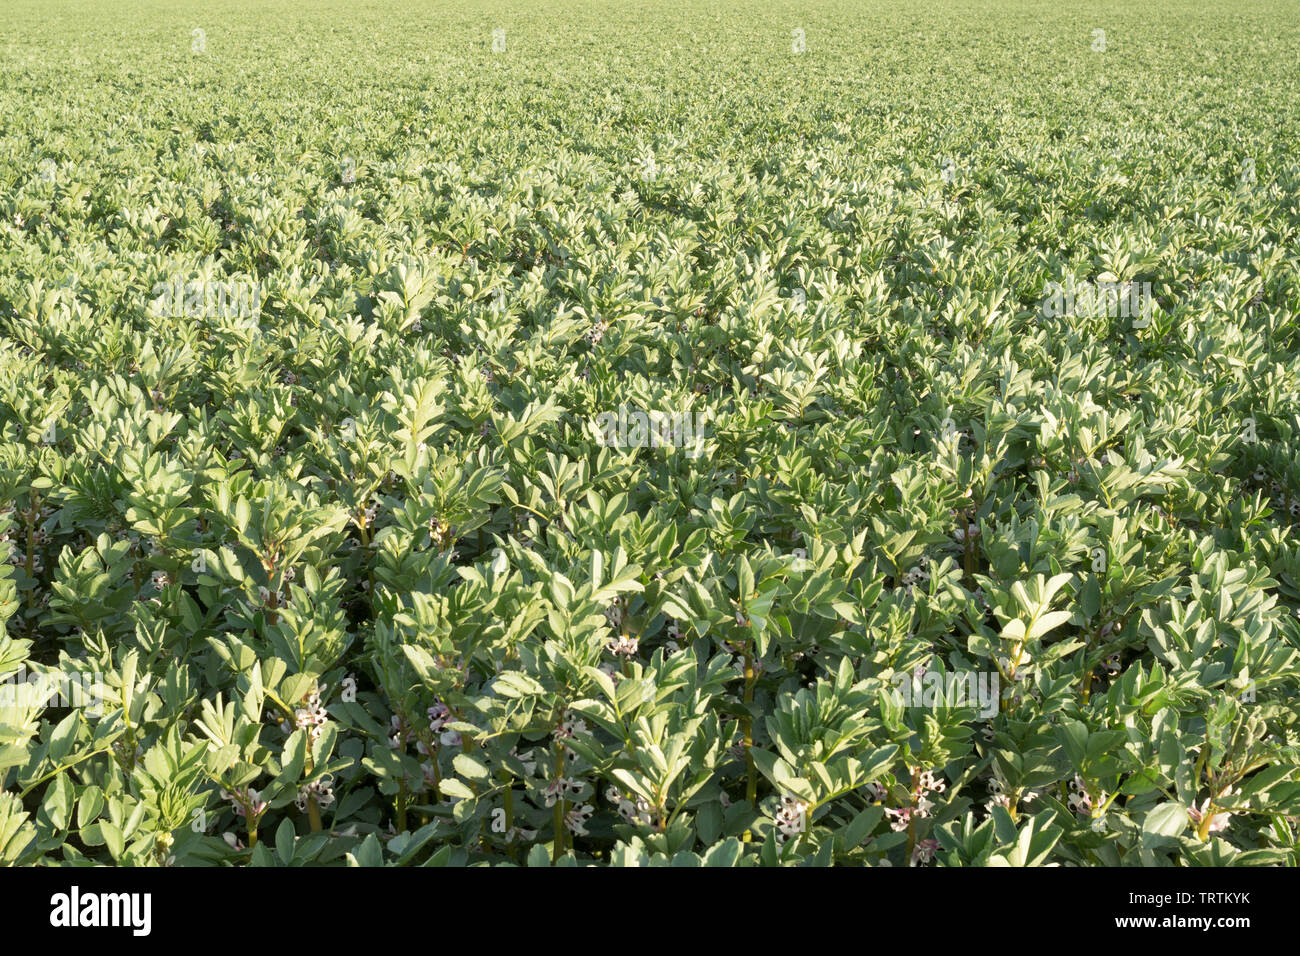 Broad beans growing in a farmer's field near Slingsby, North Yorkshire, England, UK Stock Photo